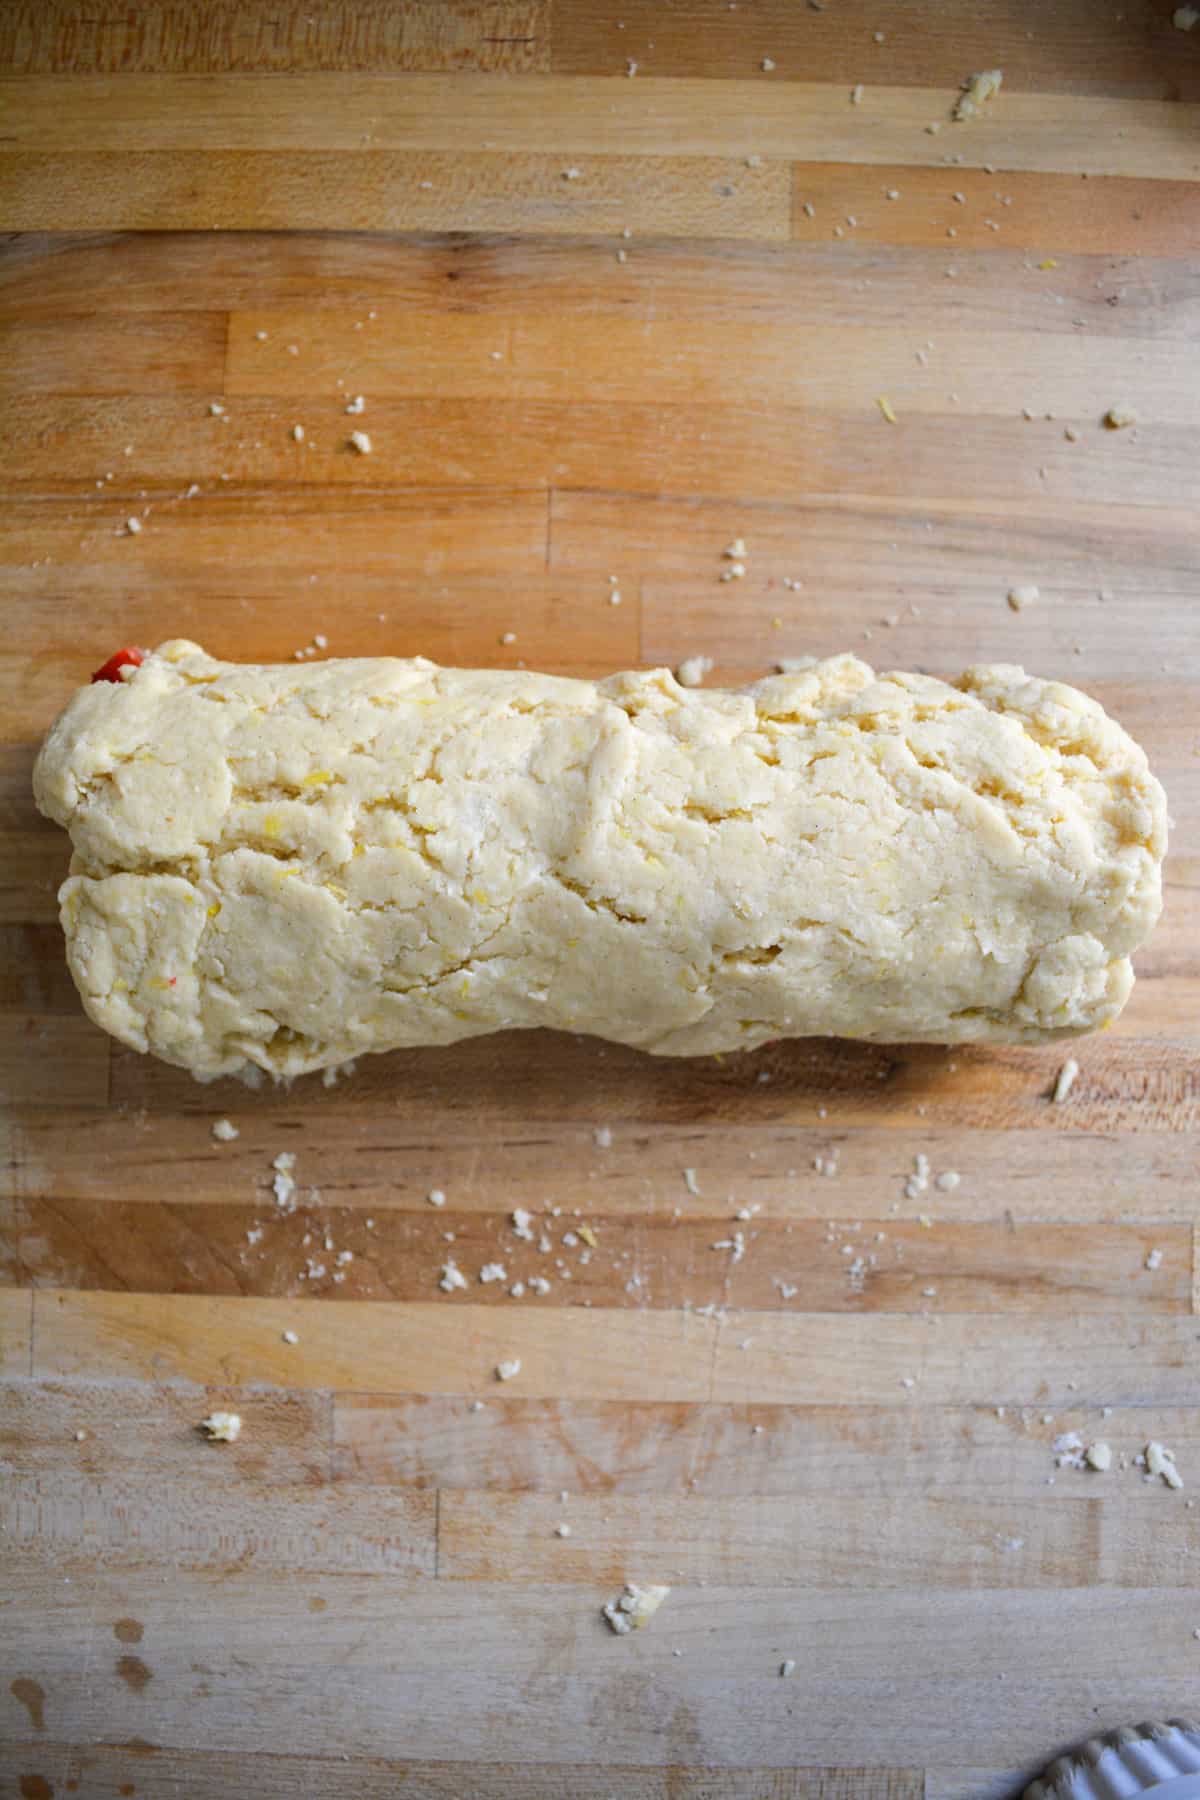 Scone dough rolled into a log on a wooden surface.